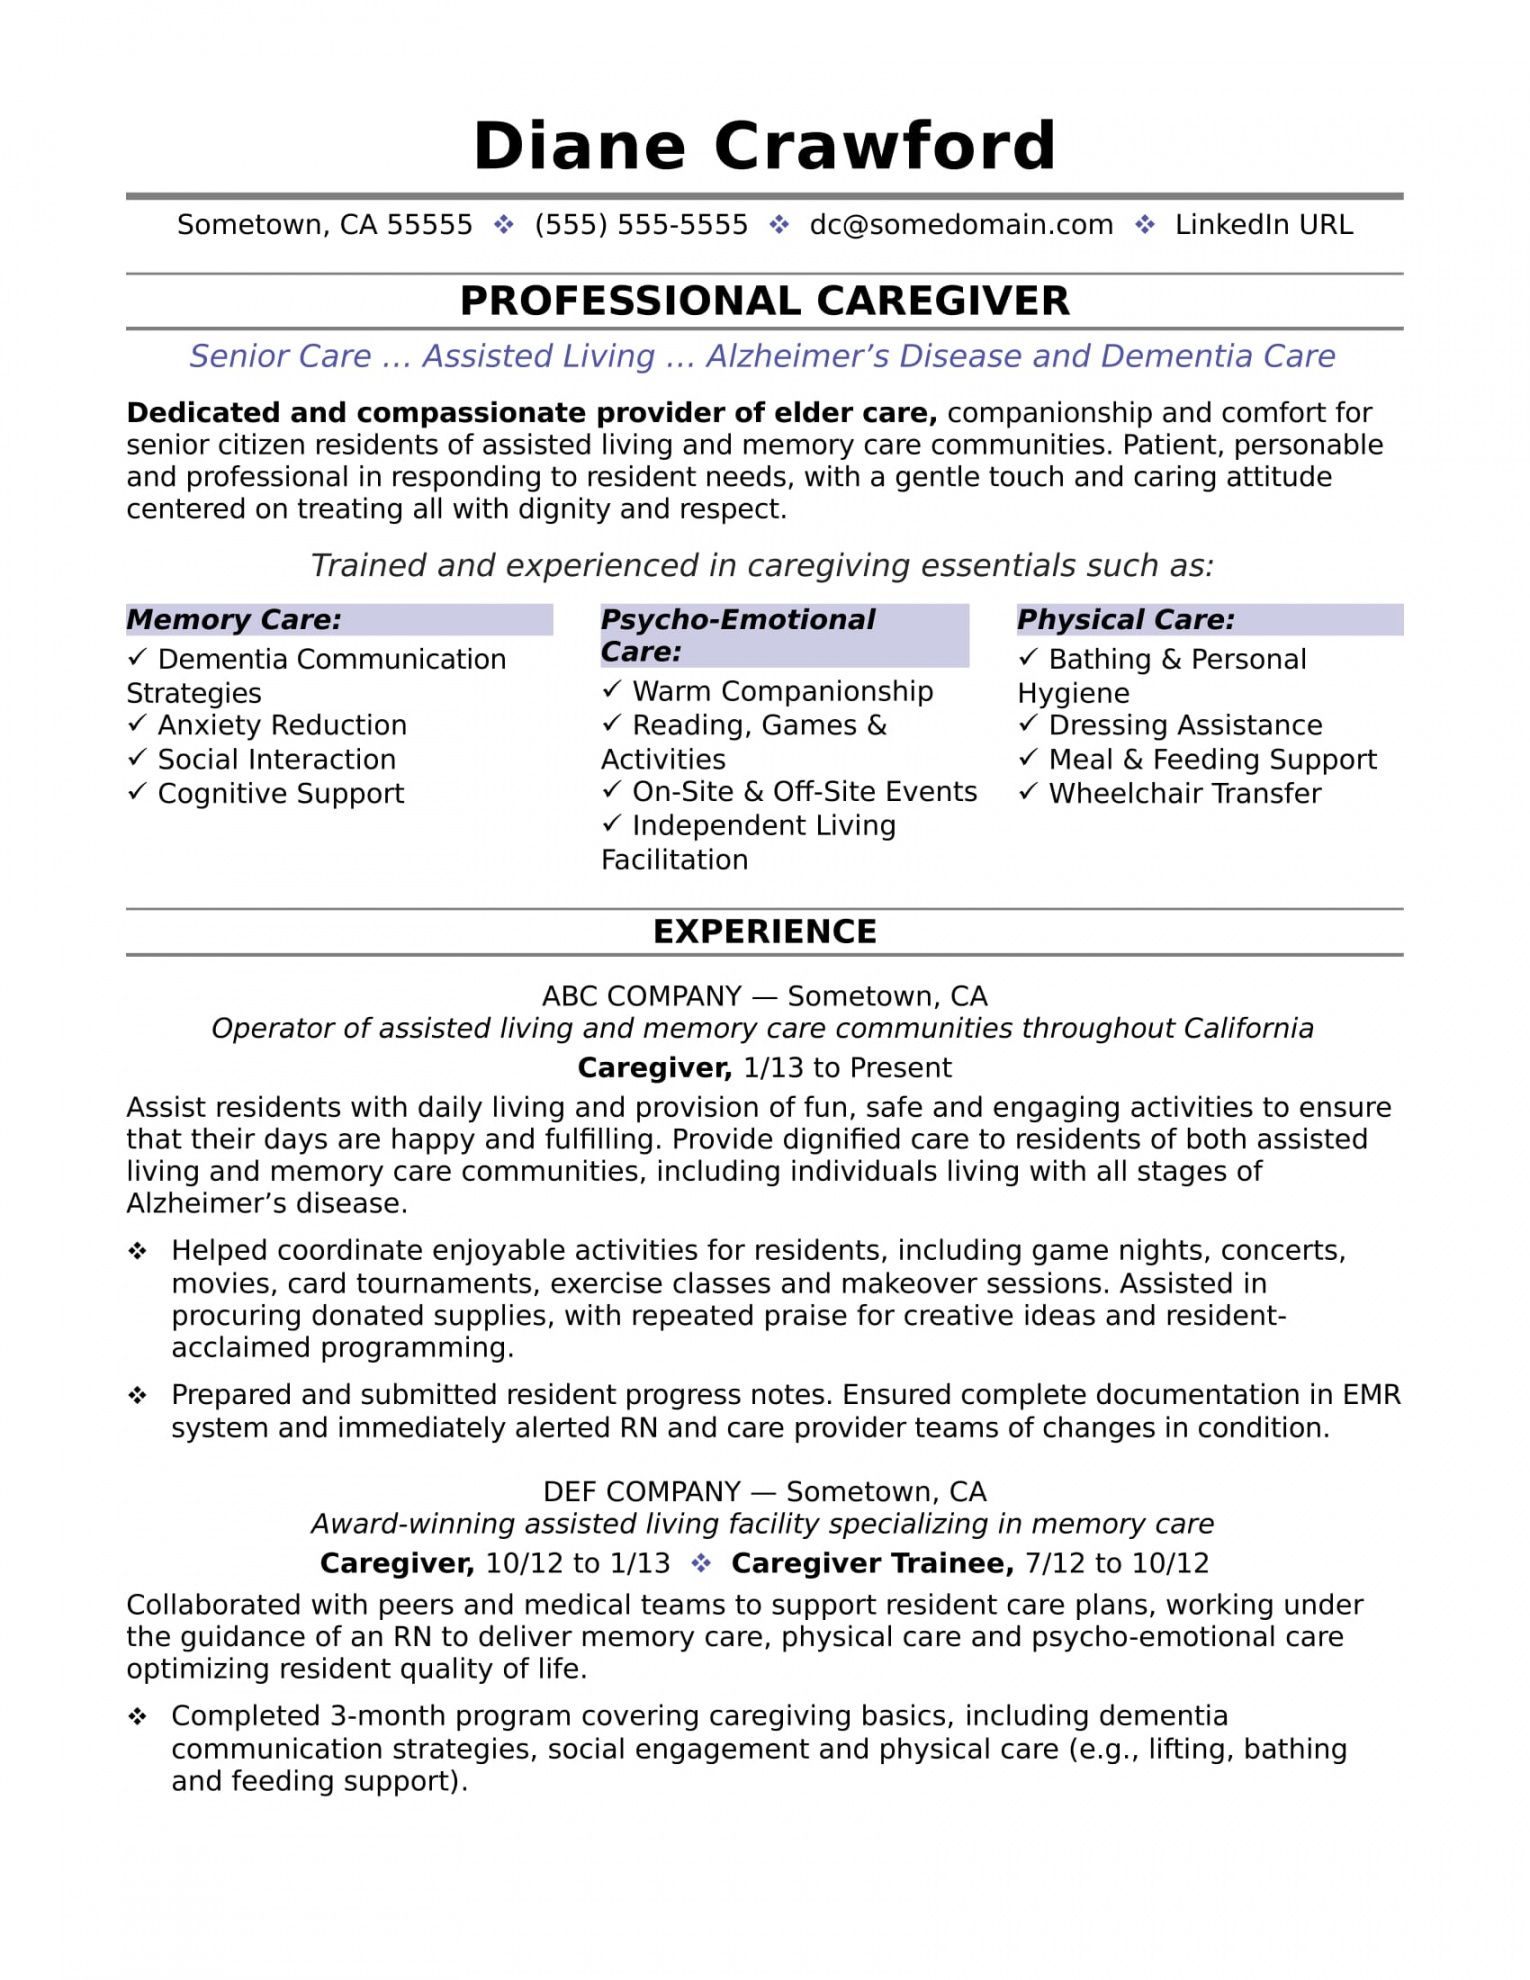 healthcare resume templates word download